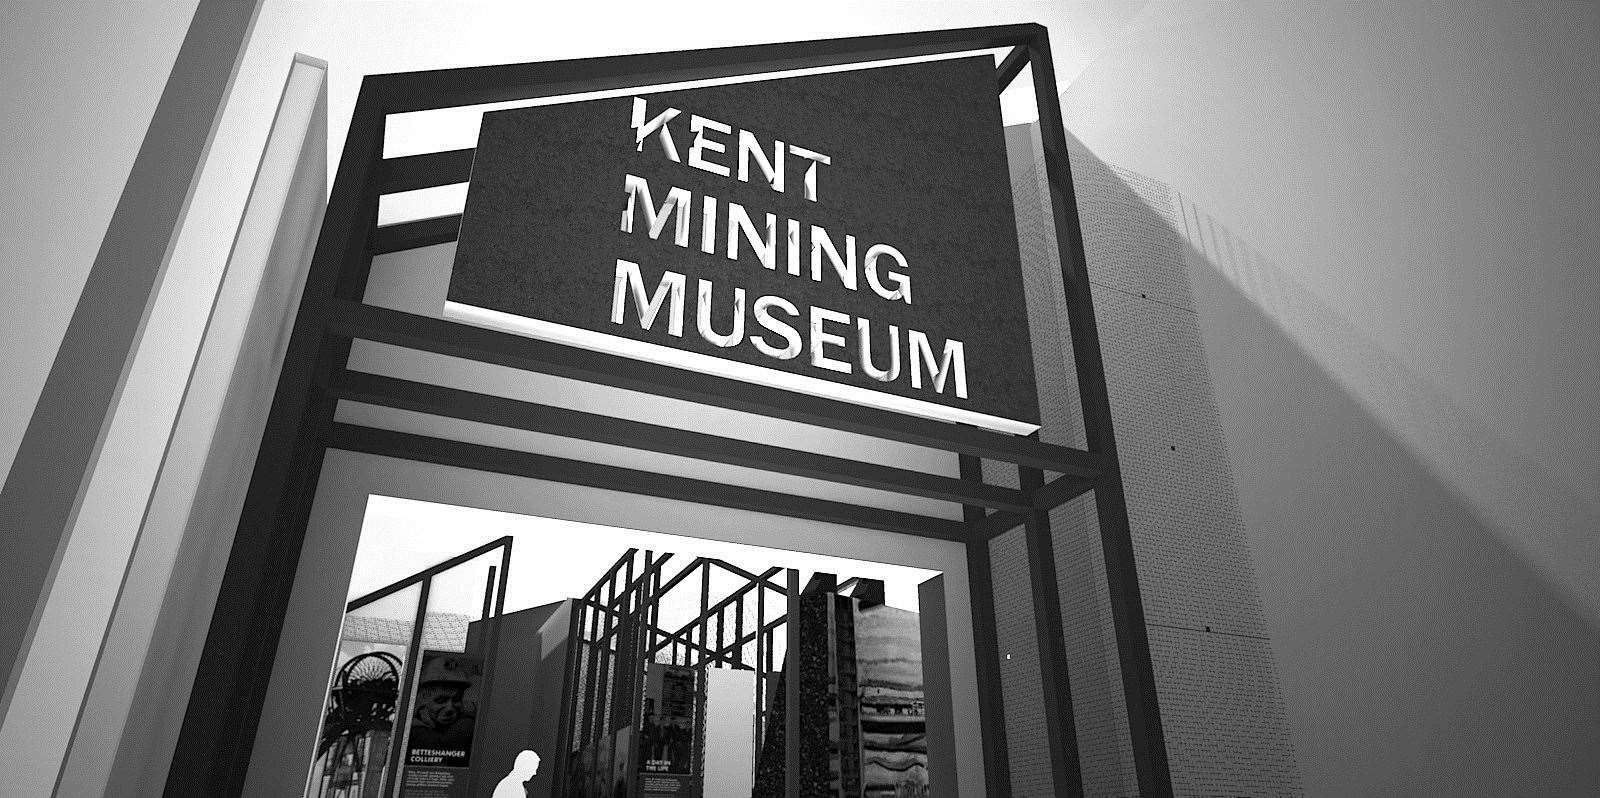 Kent Mining Museum will be the first facility of its kind in the county